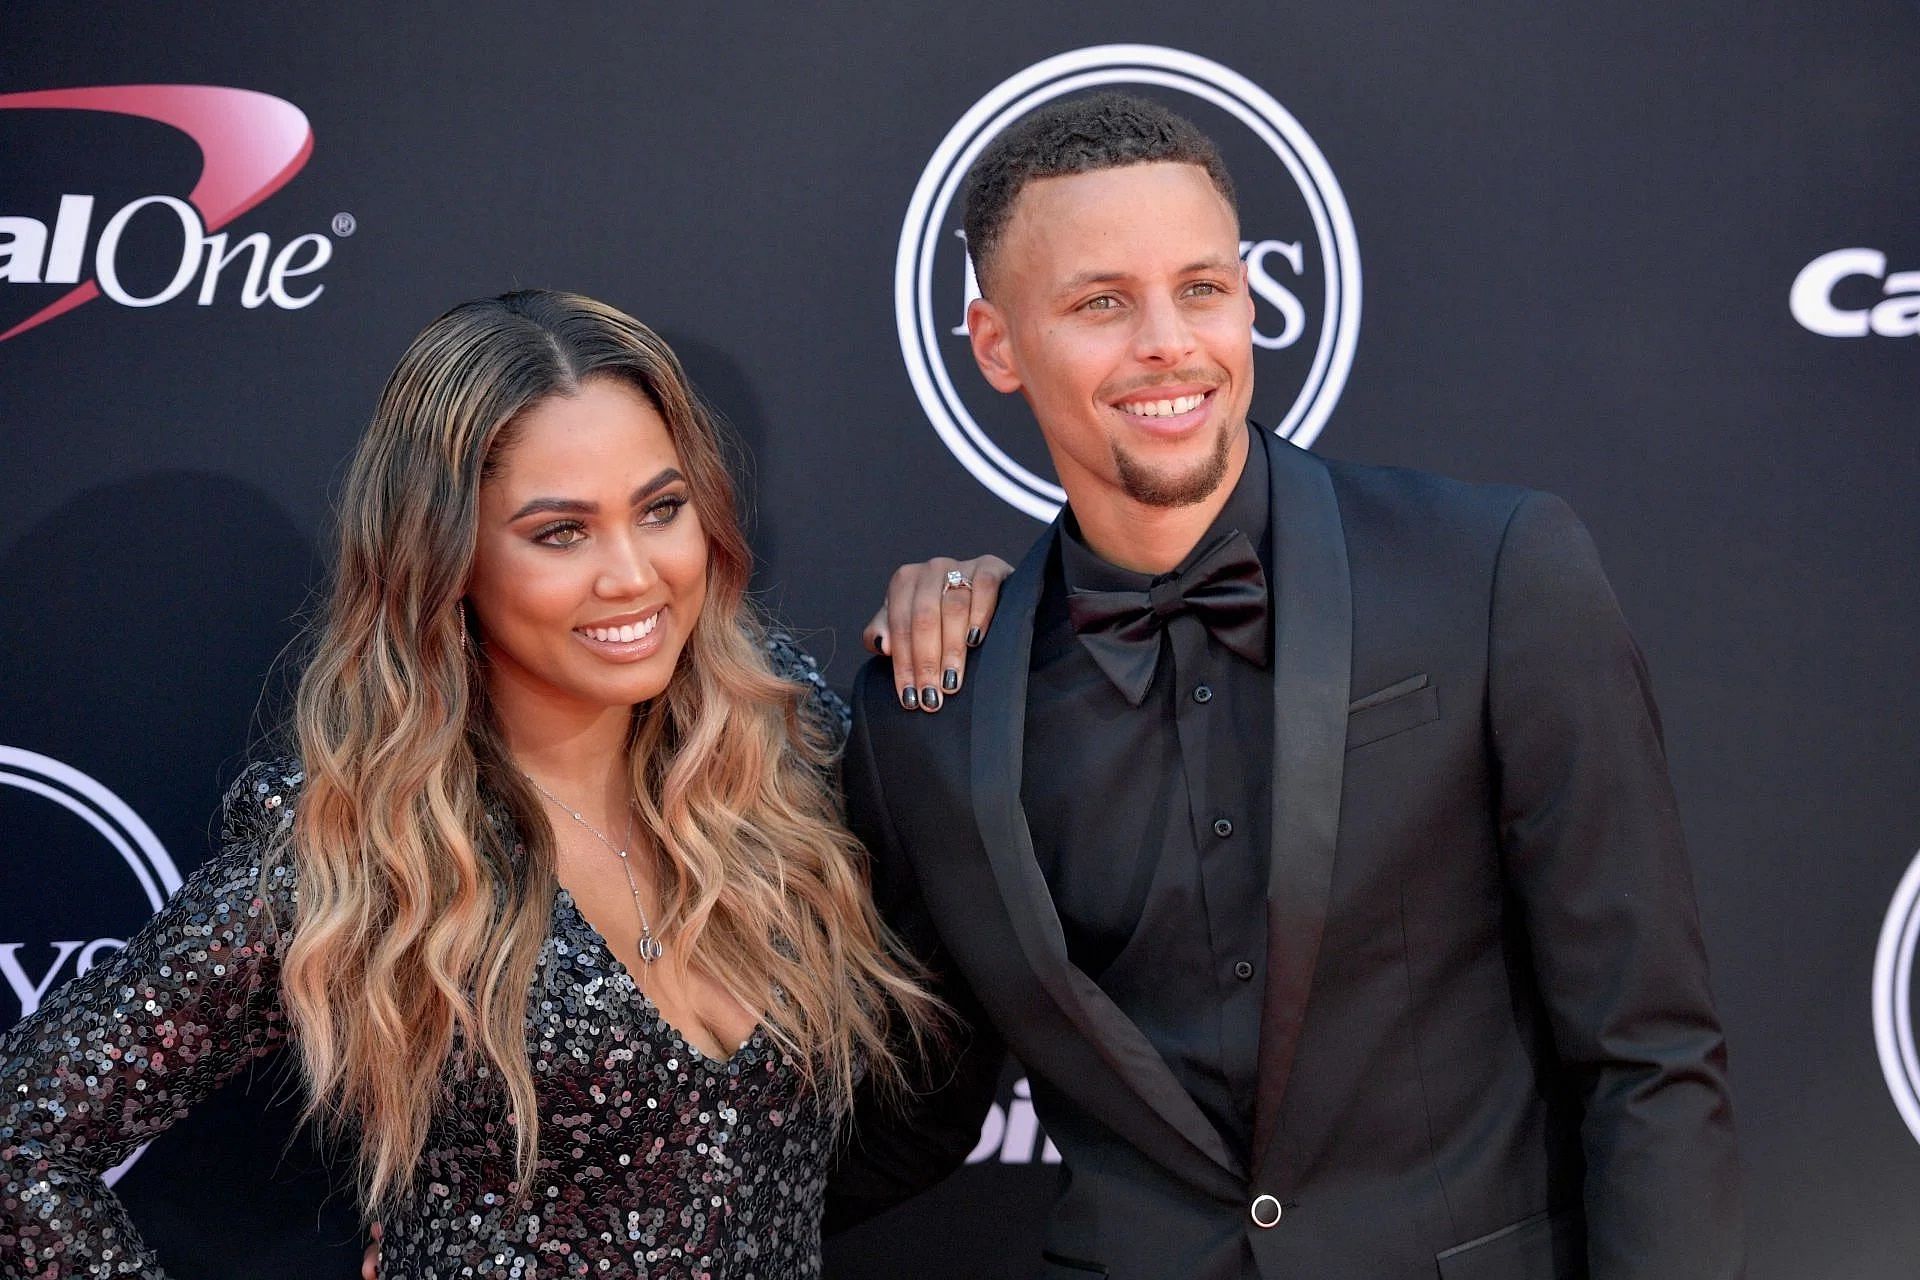 NBA All-Star Stephen Curry with wife Ayesha